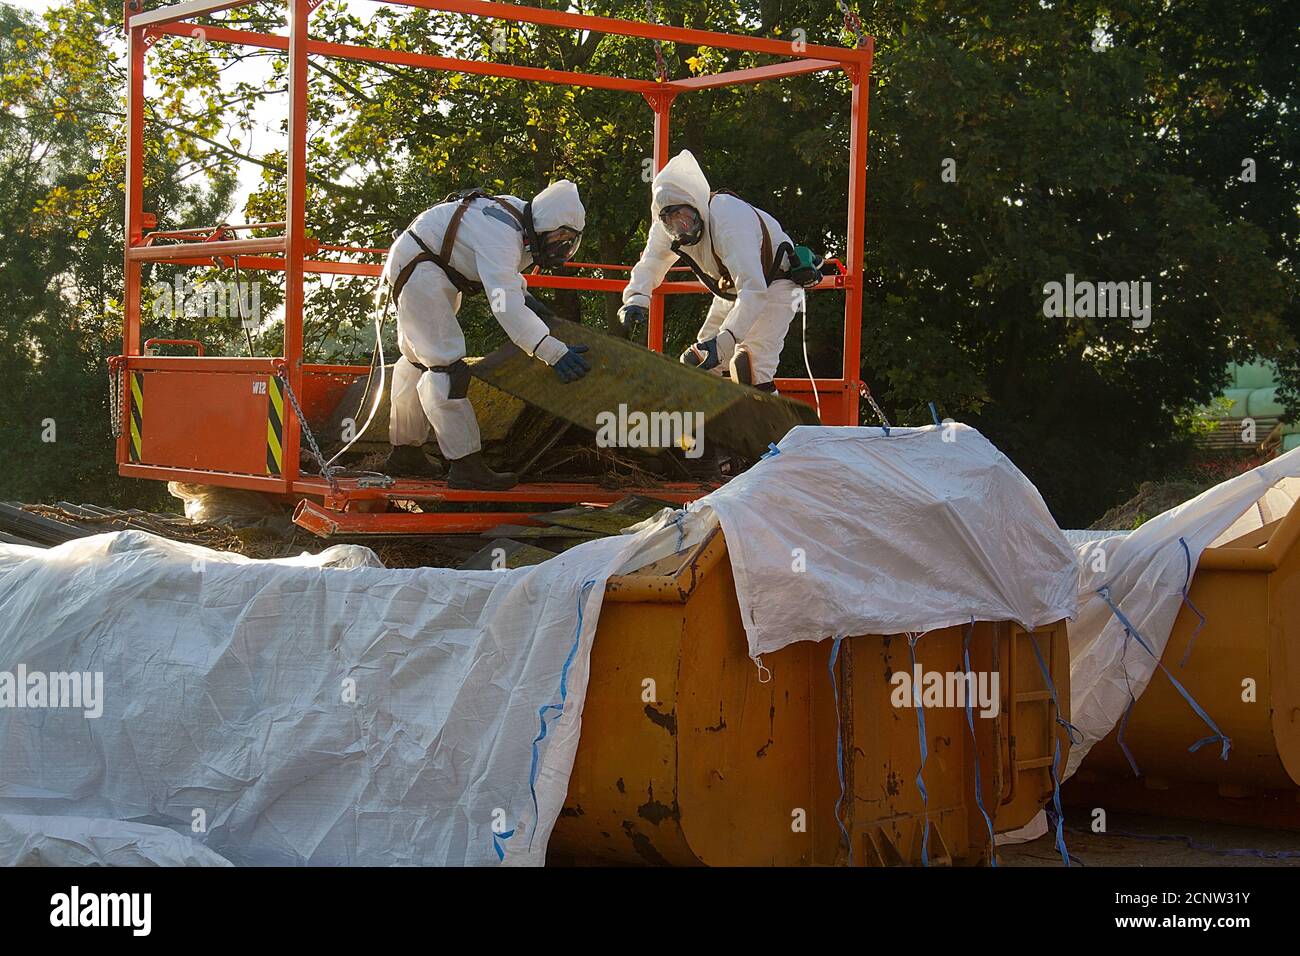 Professional asbestos removal. Two men in protective suits are removing asbestos cement corrugated roofing, bringing it from the roof into a container Stock Photo